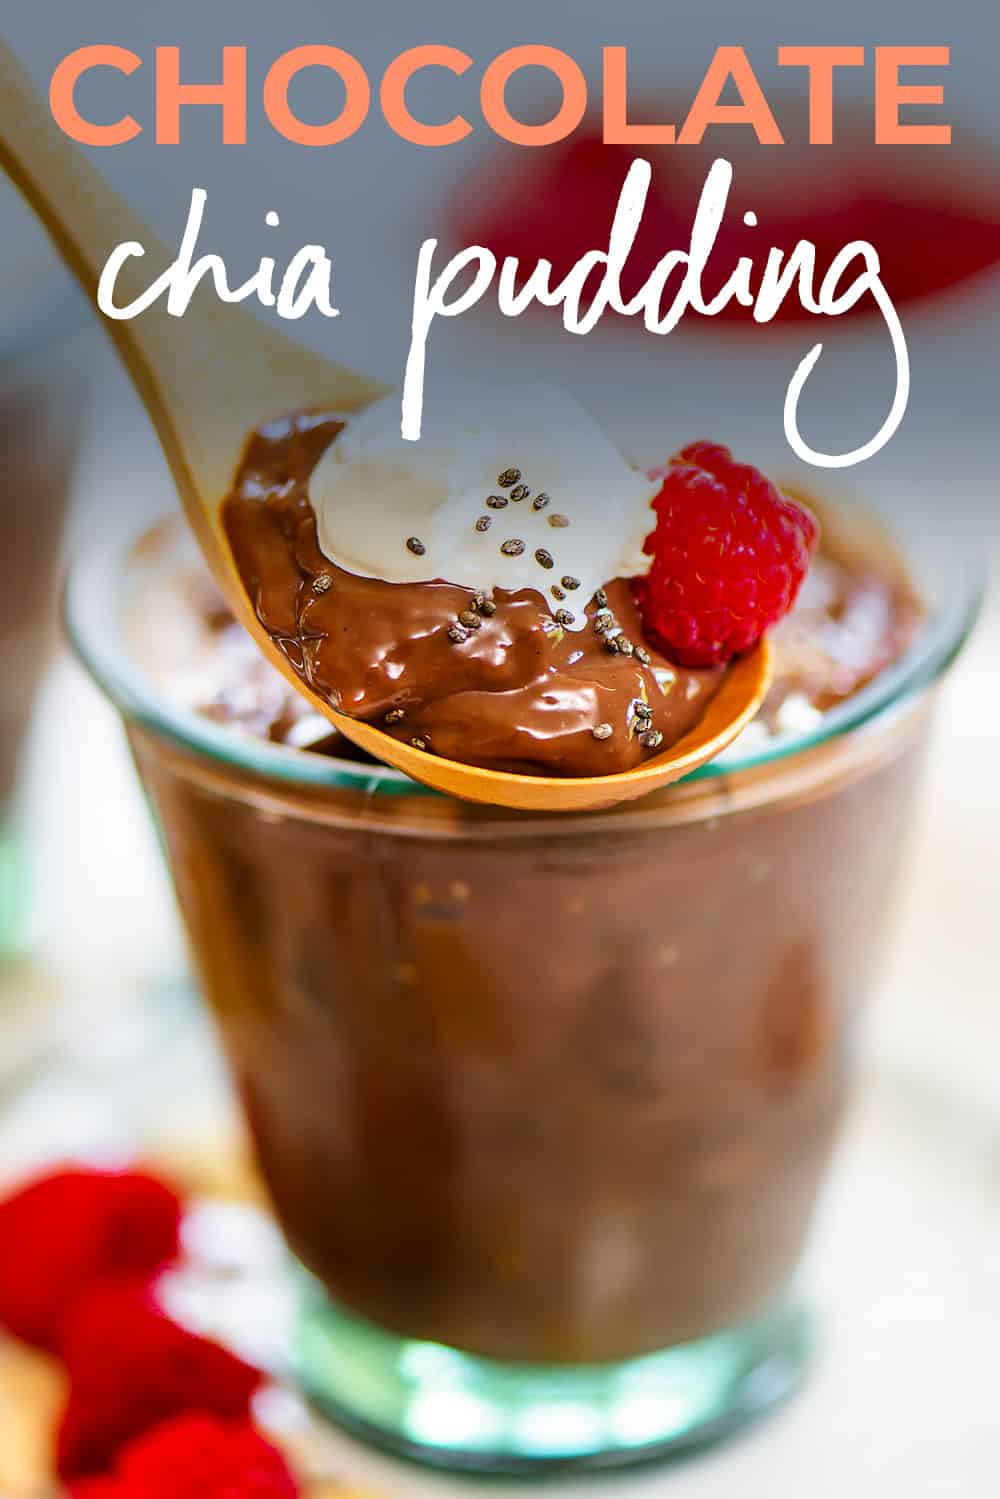 Spoonful of keto chia pudding with text for Pinterest.